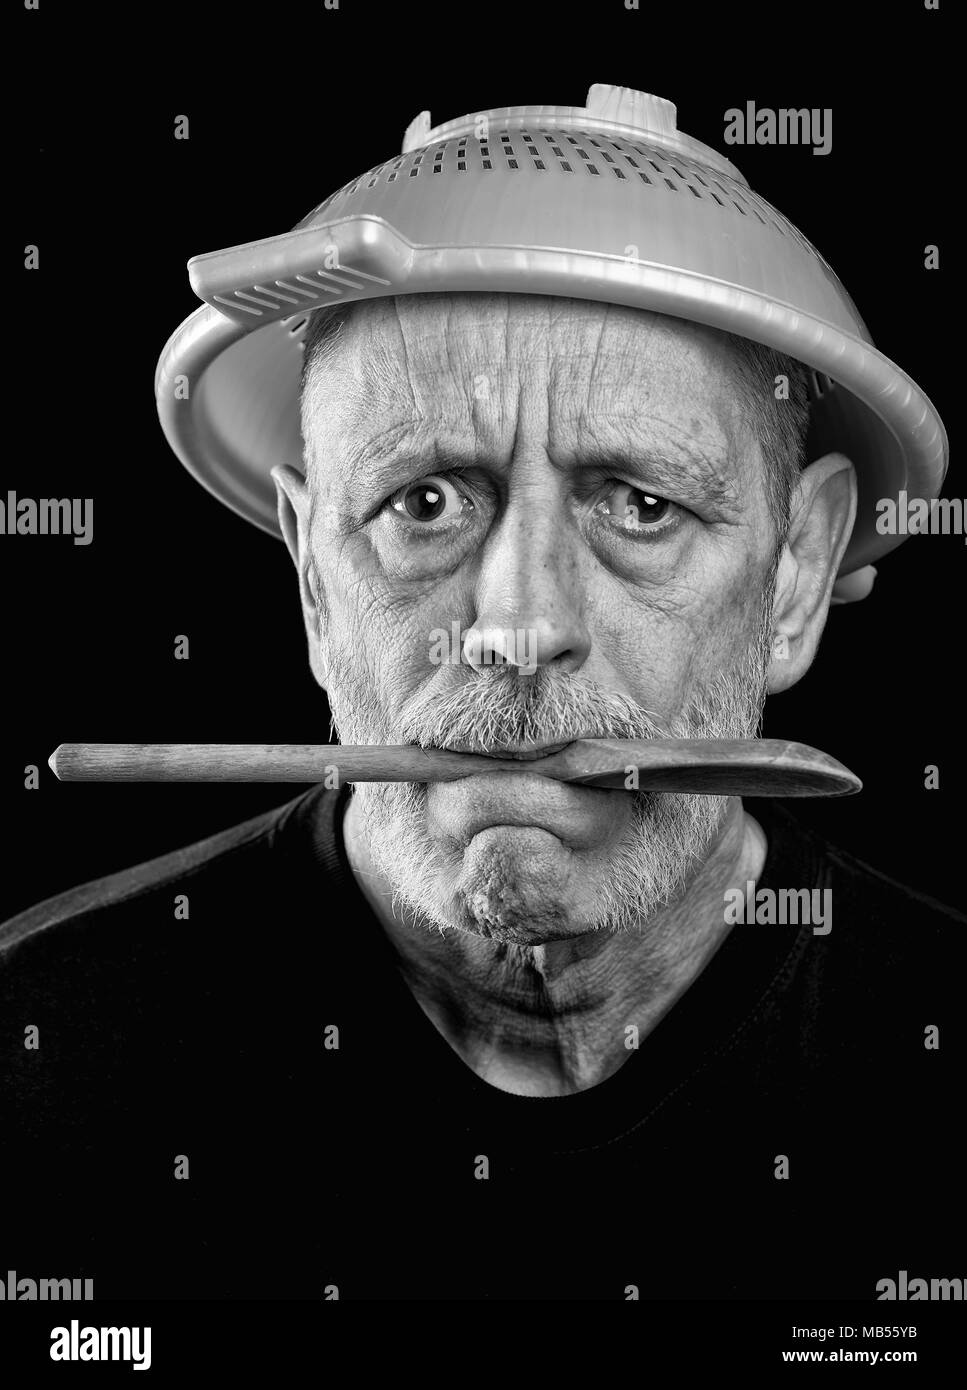 Dramatic black and white Portrait of a mad man with a plastic strainer on the head and a wooden spoon in the mouth Stock Photo